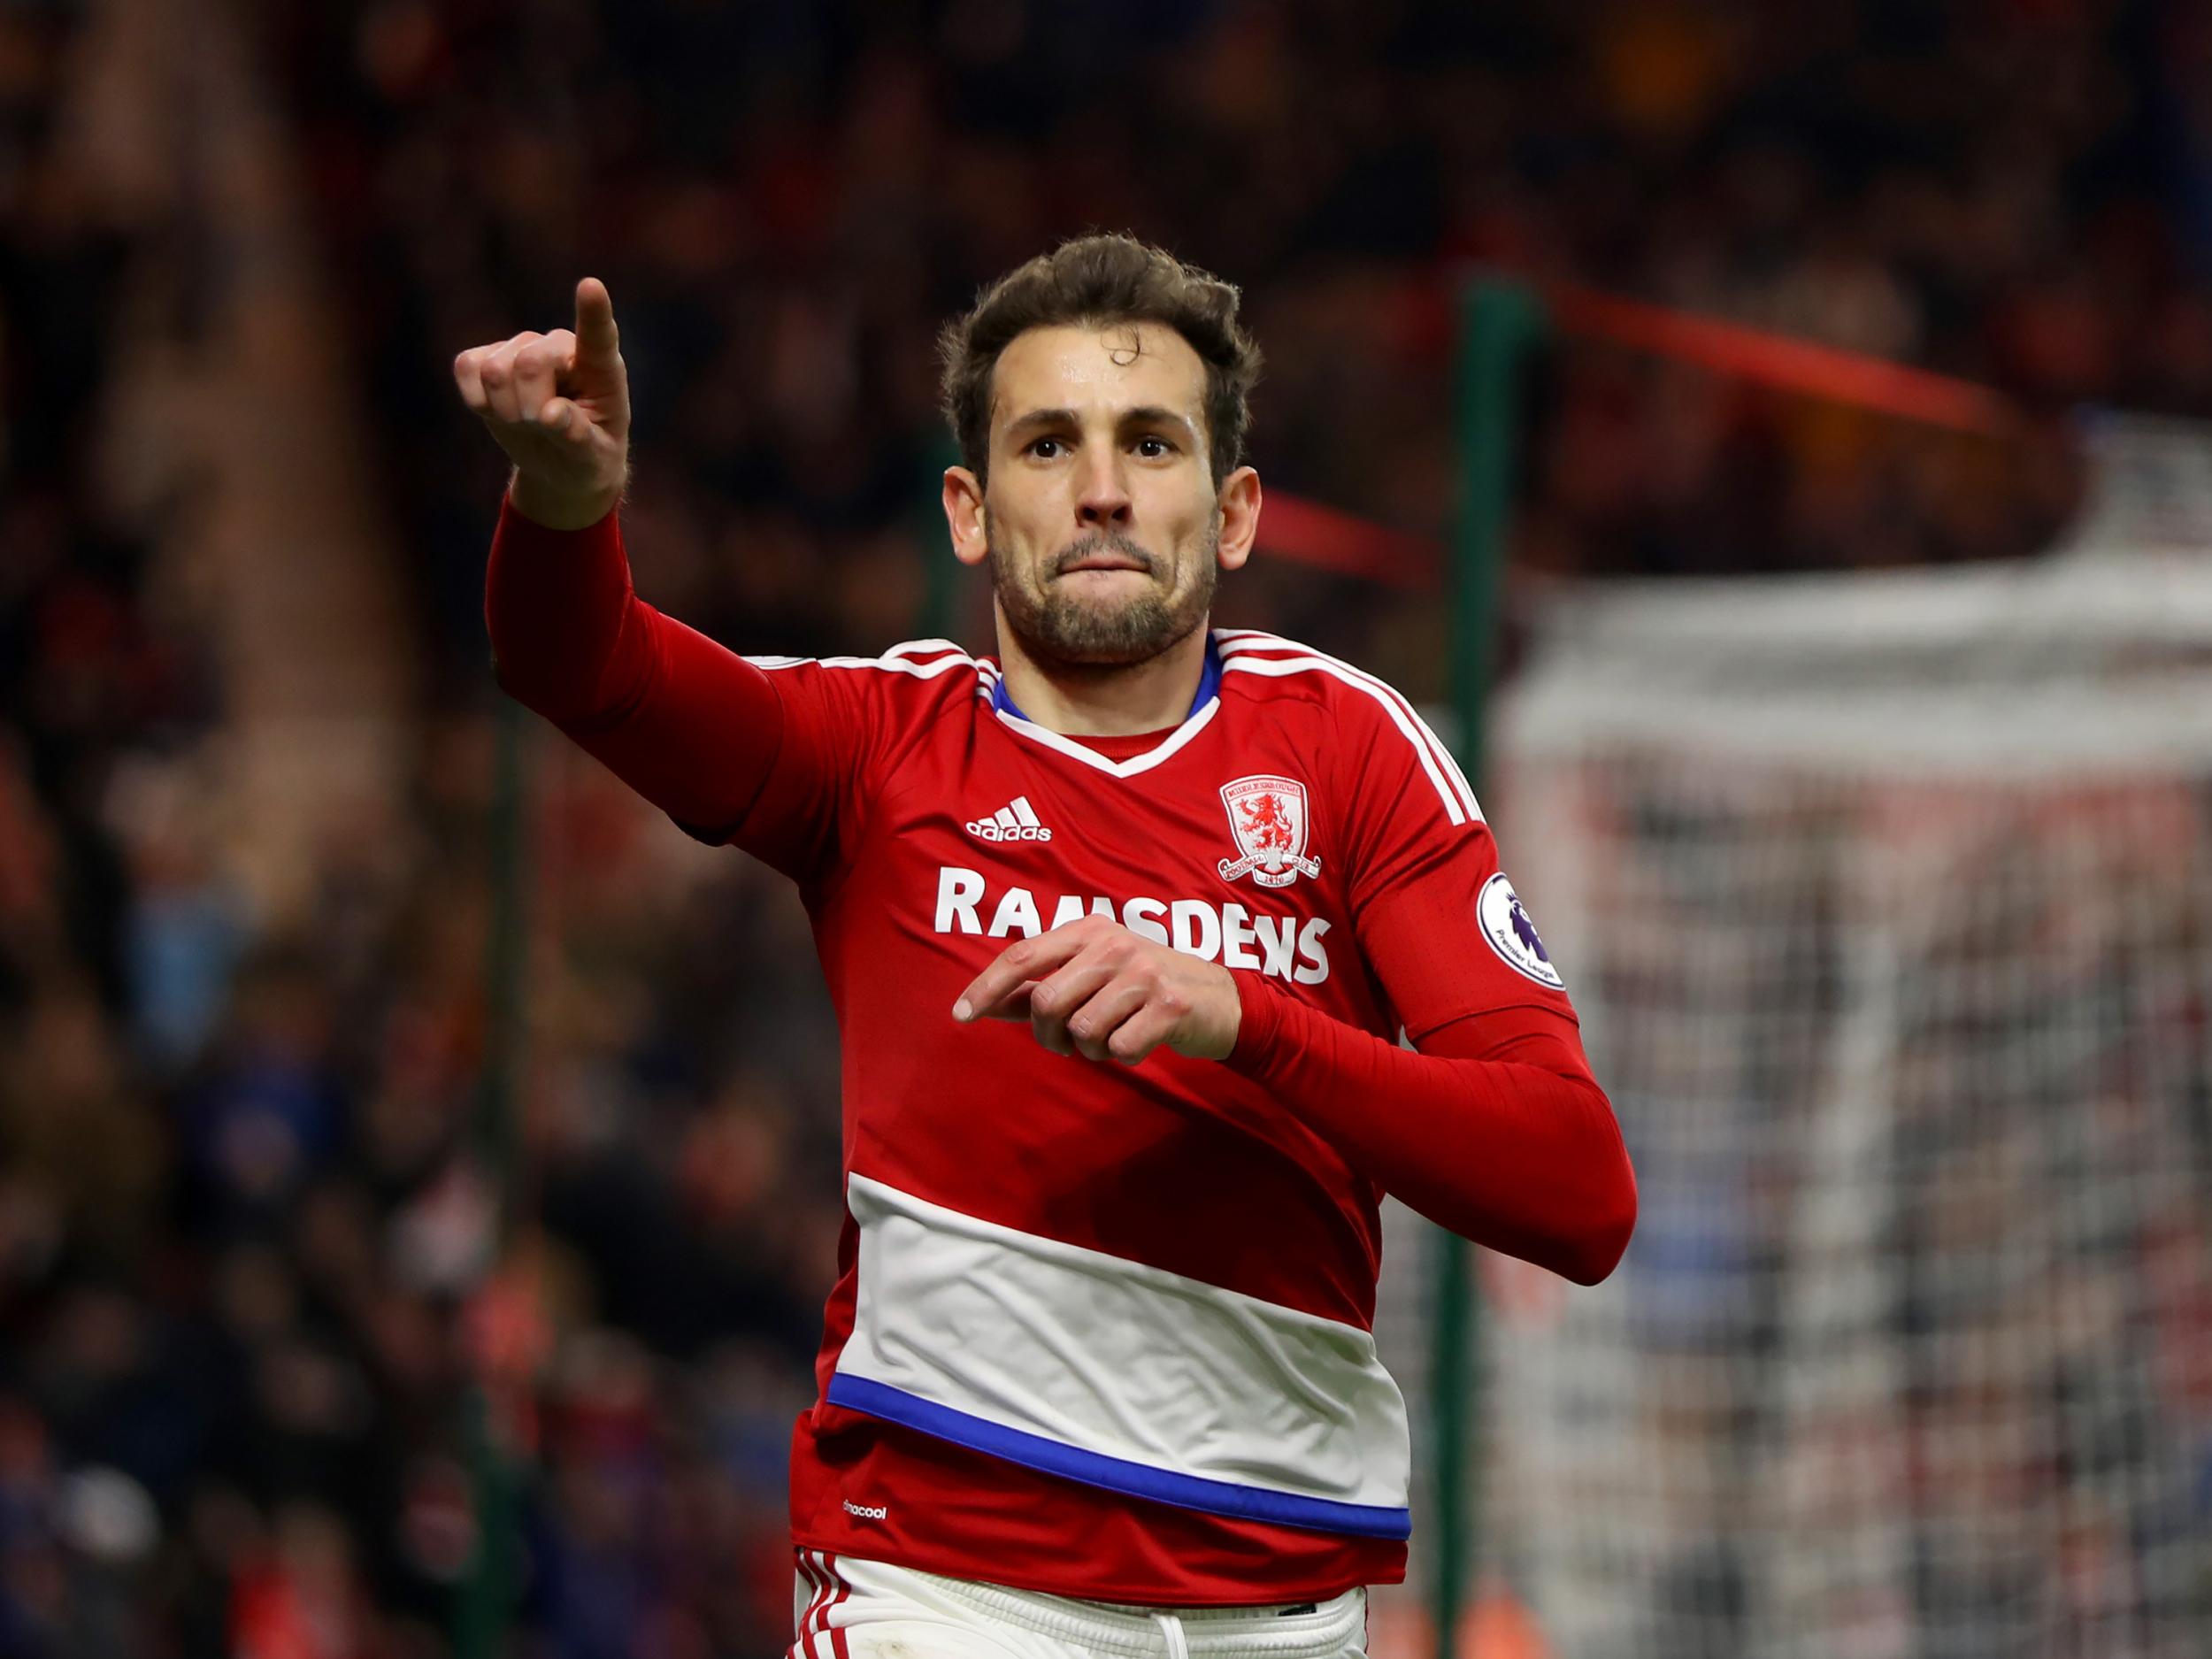 Substitute Cristhian Stuani won the game in the last few minutes